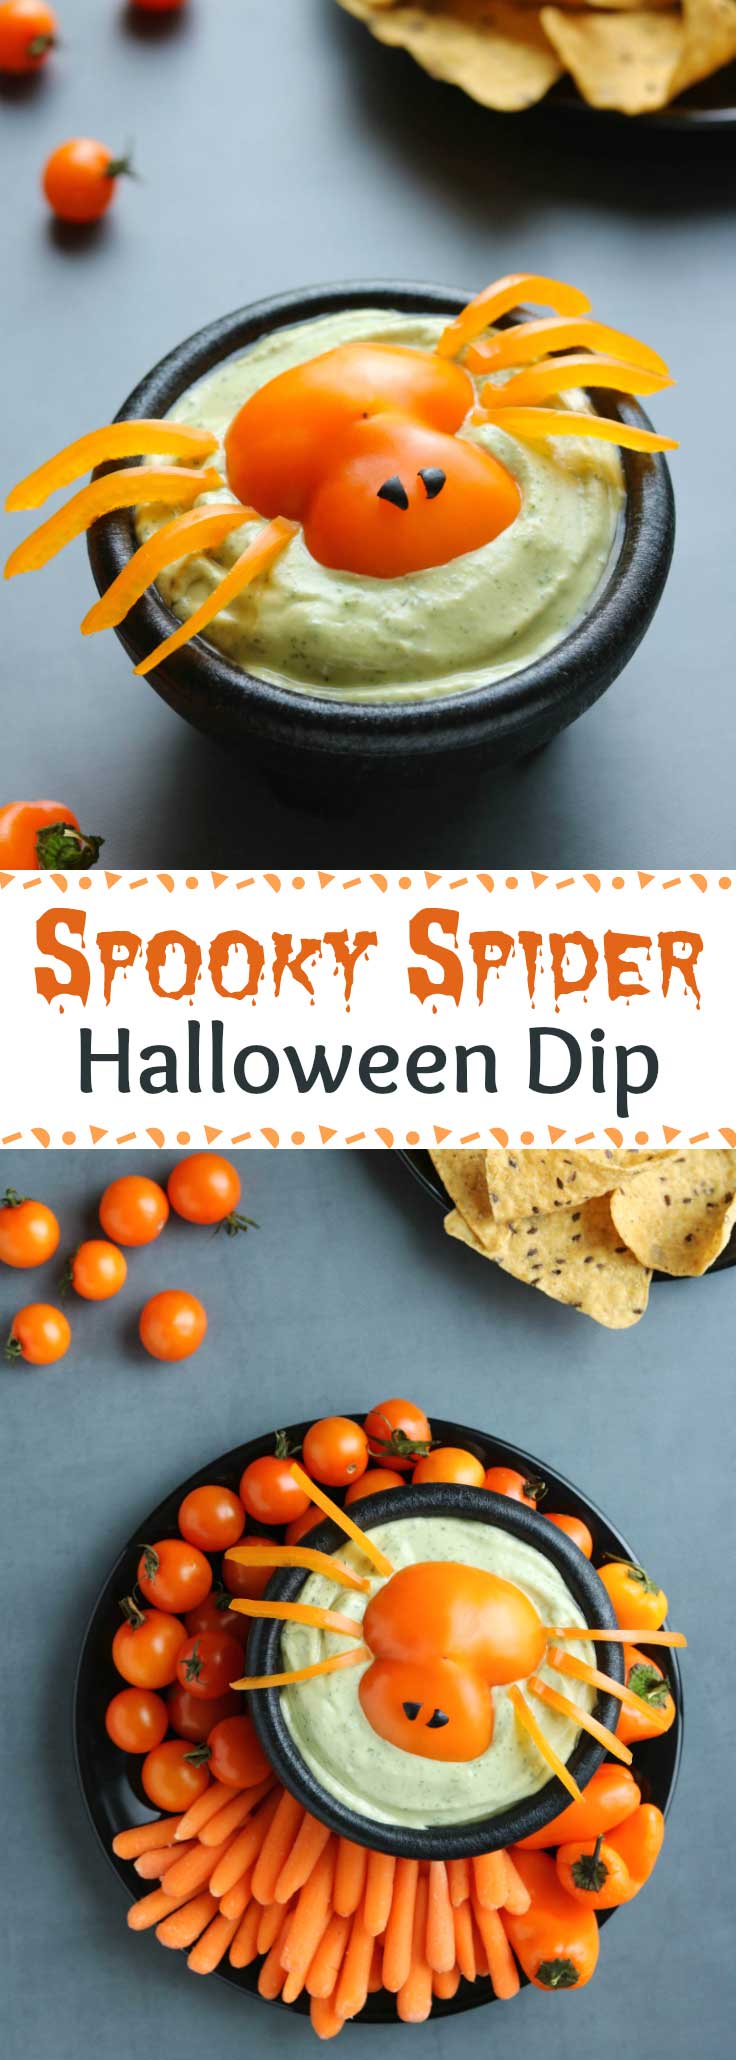 Quick and easy Halloween idea! A total hit at Halloween parties, on appetizer buffets, or even as a fun after-school snack before trick-or-treating! This adorable “Spooky Spider” Halloween Appetizer Dip idea works with practically any dip – from ranch dip to other vegetable dips, even hummus or a 7-layer dip. Darling for Halloween vegetable trays, it makes a great Halloween centerpiece! Bonus: this Halloween Dip recipe idea is a HEALTHY Halloween recipe, too! | www.TwoHealthyKitchens.com